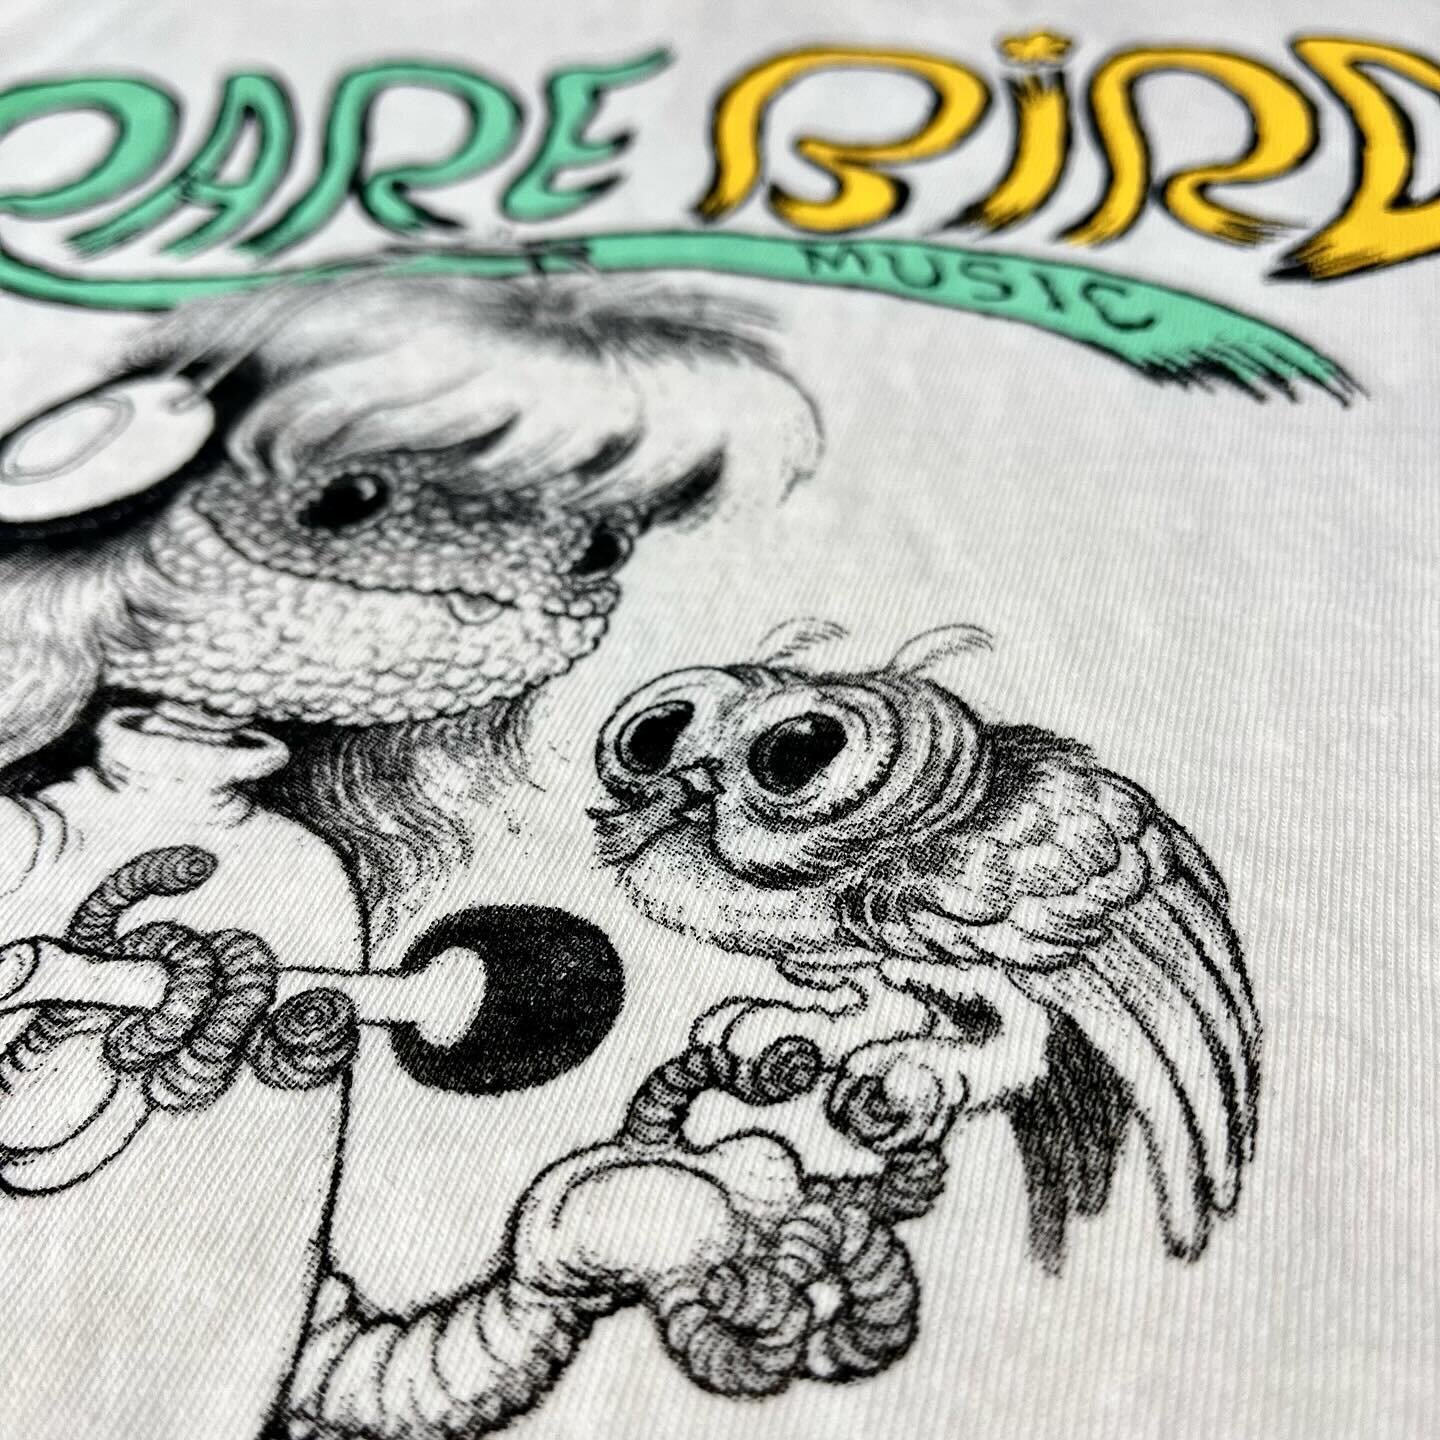 3 color very fine halftone print on Comfort Colors tees for Chicago&rsquo;s own @rarebirdsmusic! Lizard and owl buddy art by @mattgordon_paintings 
💥🏠💥

#explodinghouseprinting #rarebirdsmusic #chicagomusic #musicstore #chicago #chicagoscreenprint